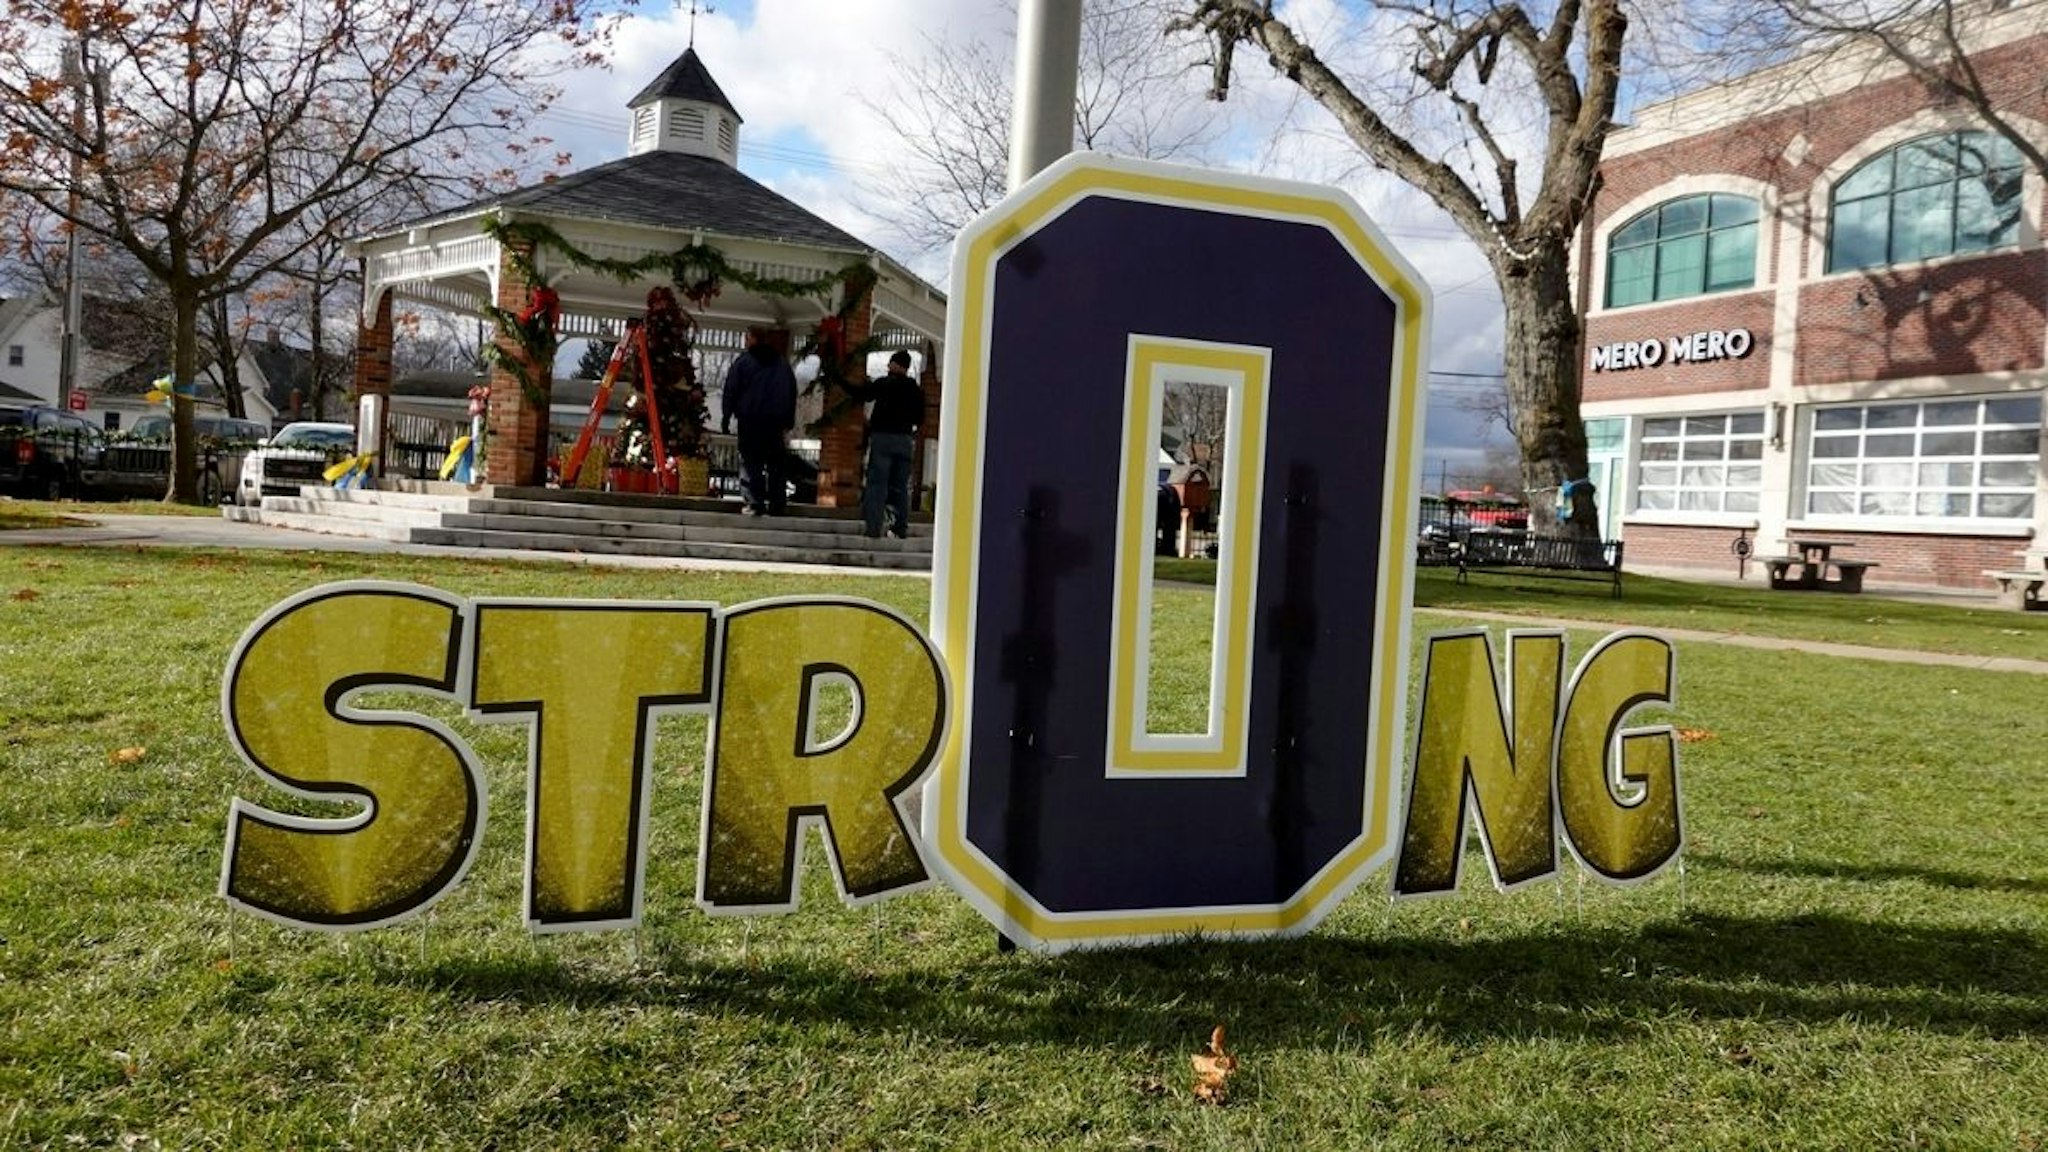 A sign in Centennial Park shows support for the students and staff killed and wounded in the November 30 shooting at Oxford High School on December 2, 2021 in Oxford, Michigan.